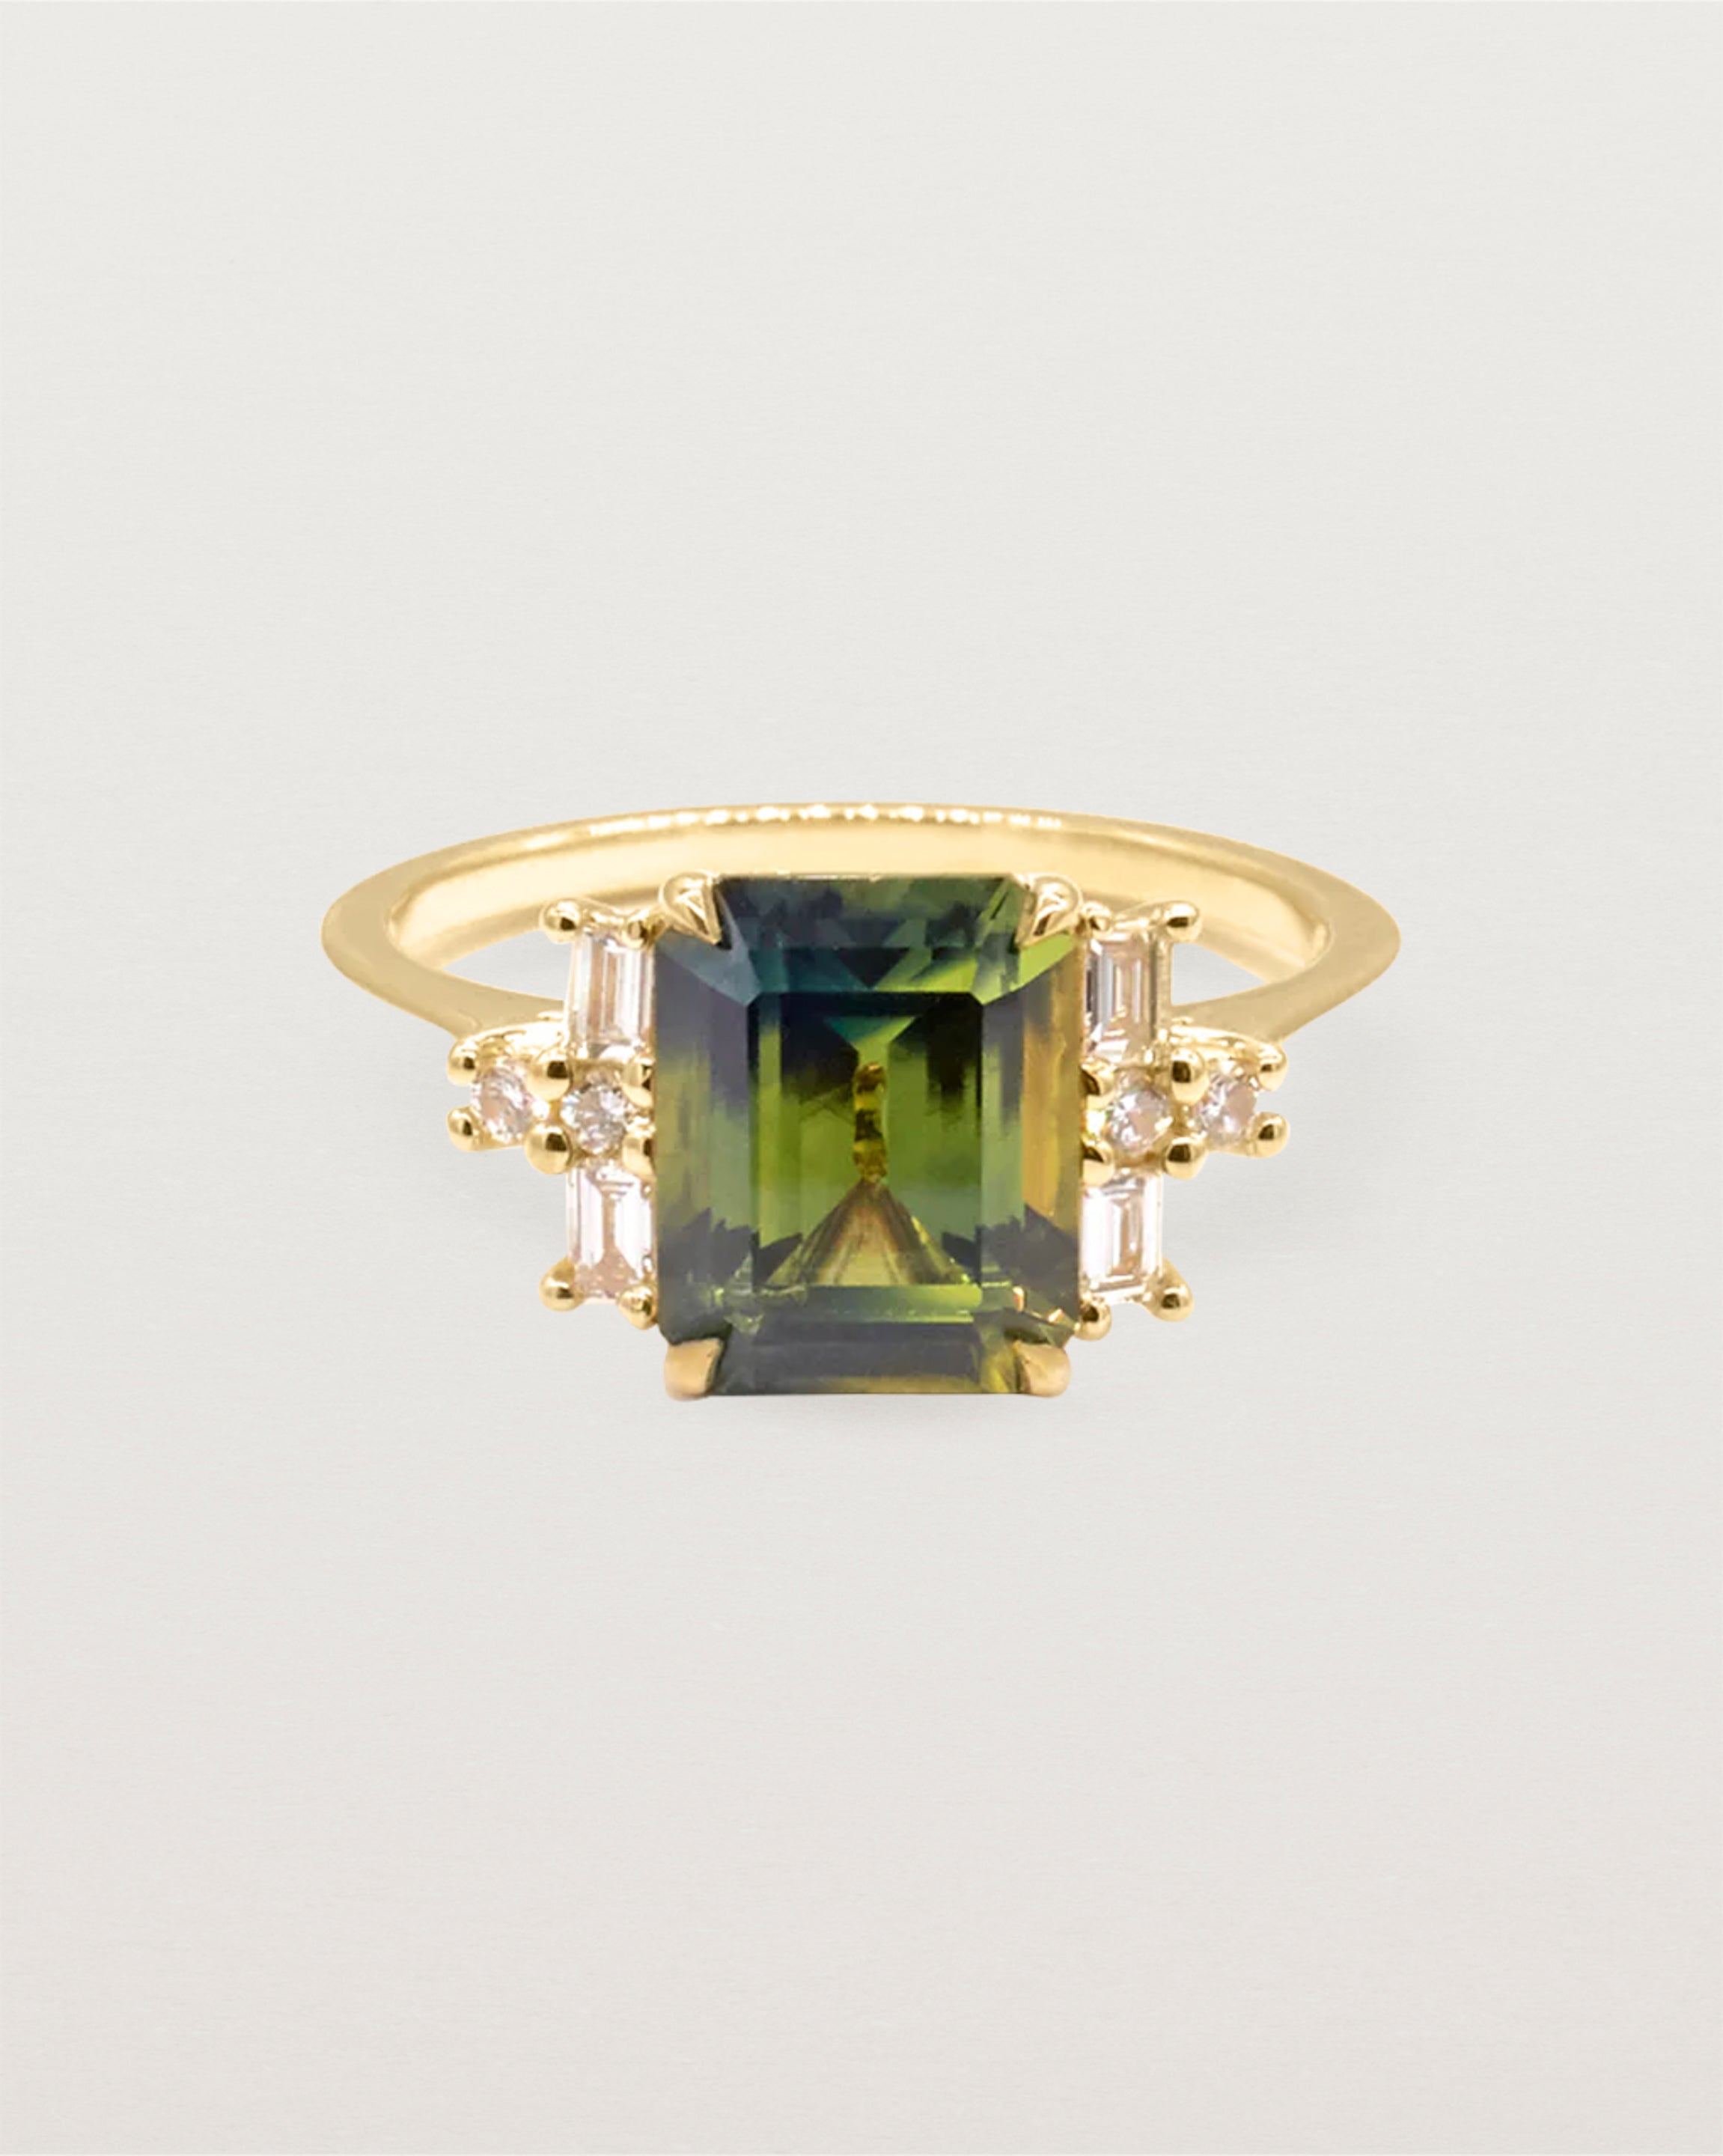 A teal pear sapphire is framed by a cluster of two baguettes and round diamonds on either side, crafted in yellow gold